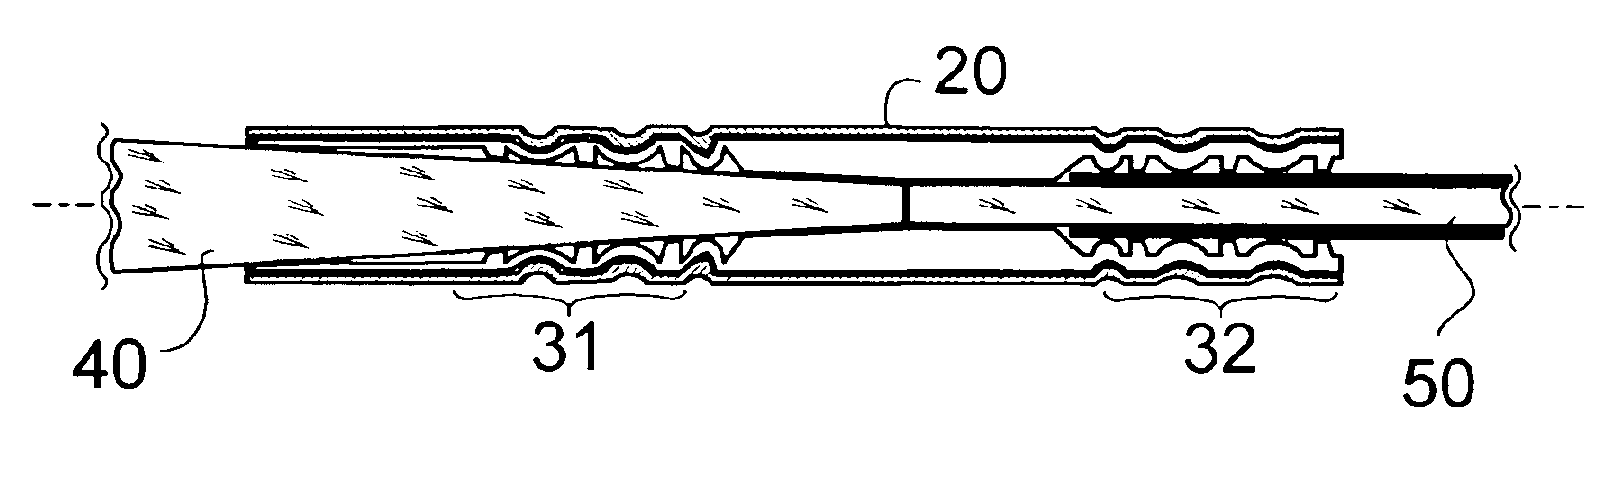 Coupling a tapered optical element to an optical fiber